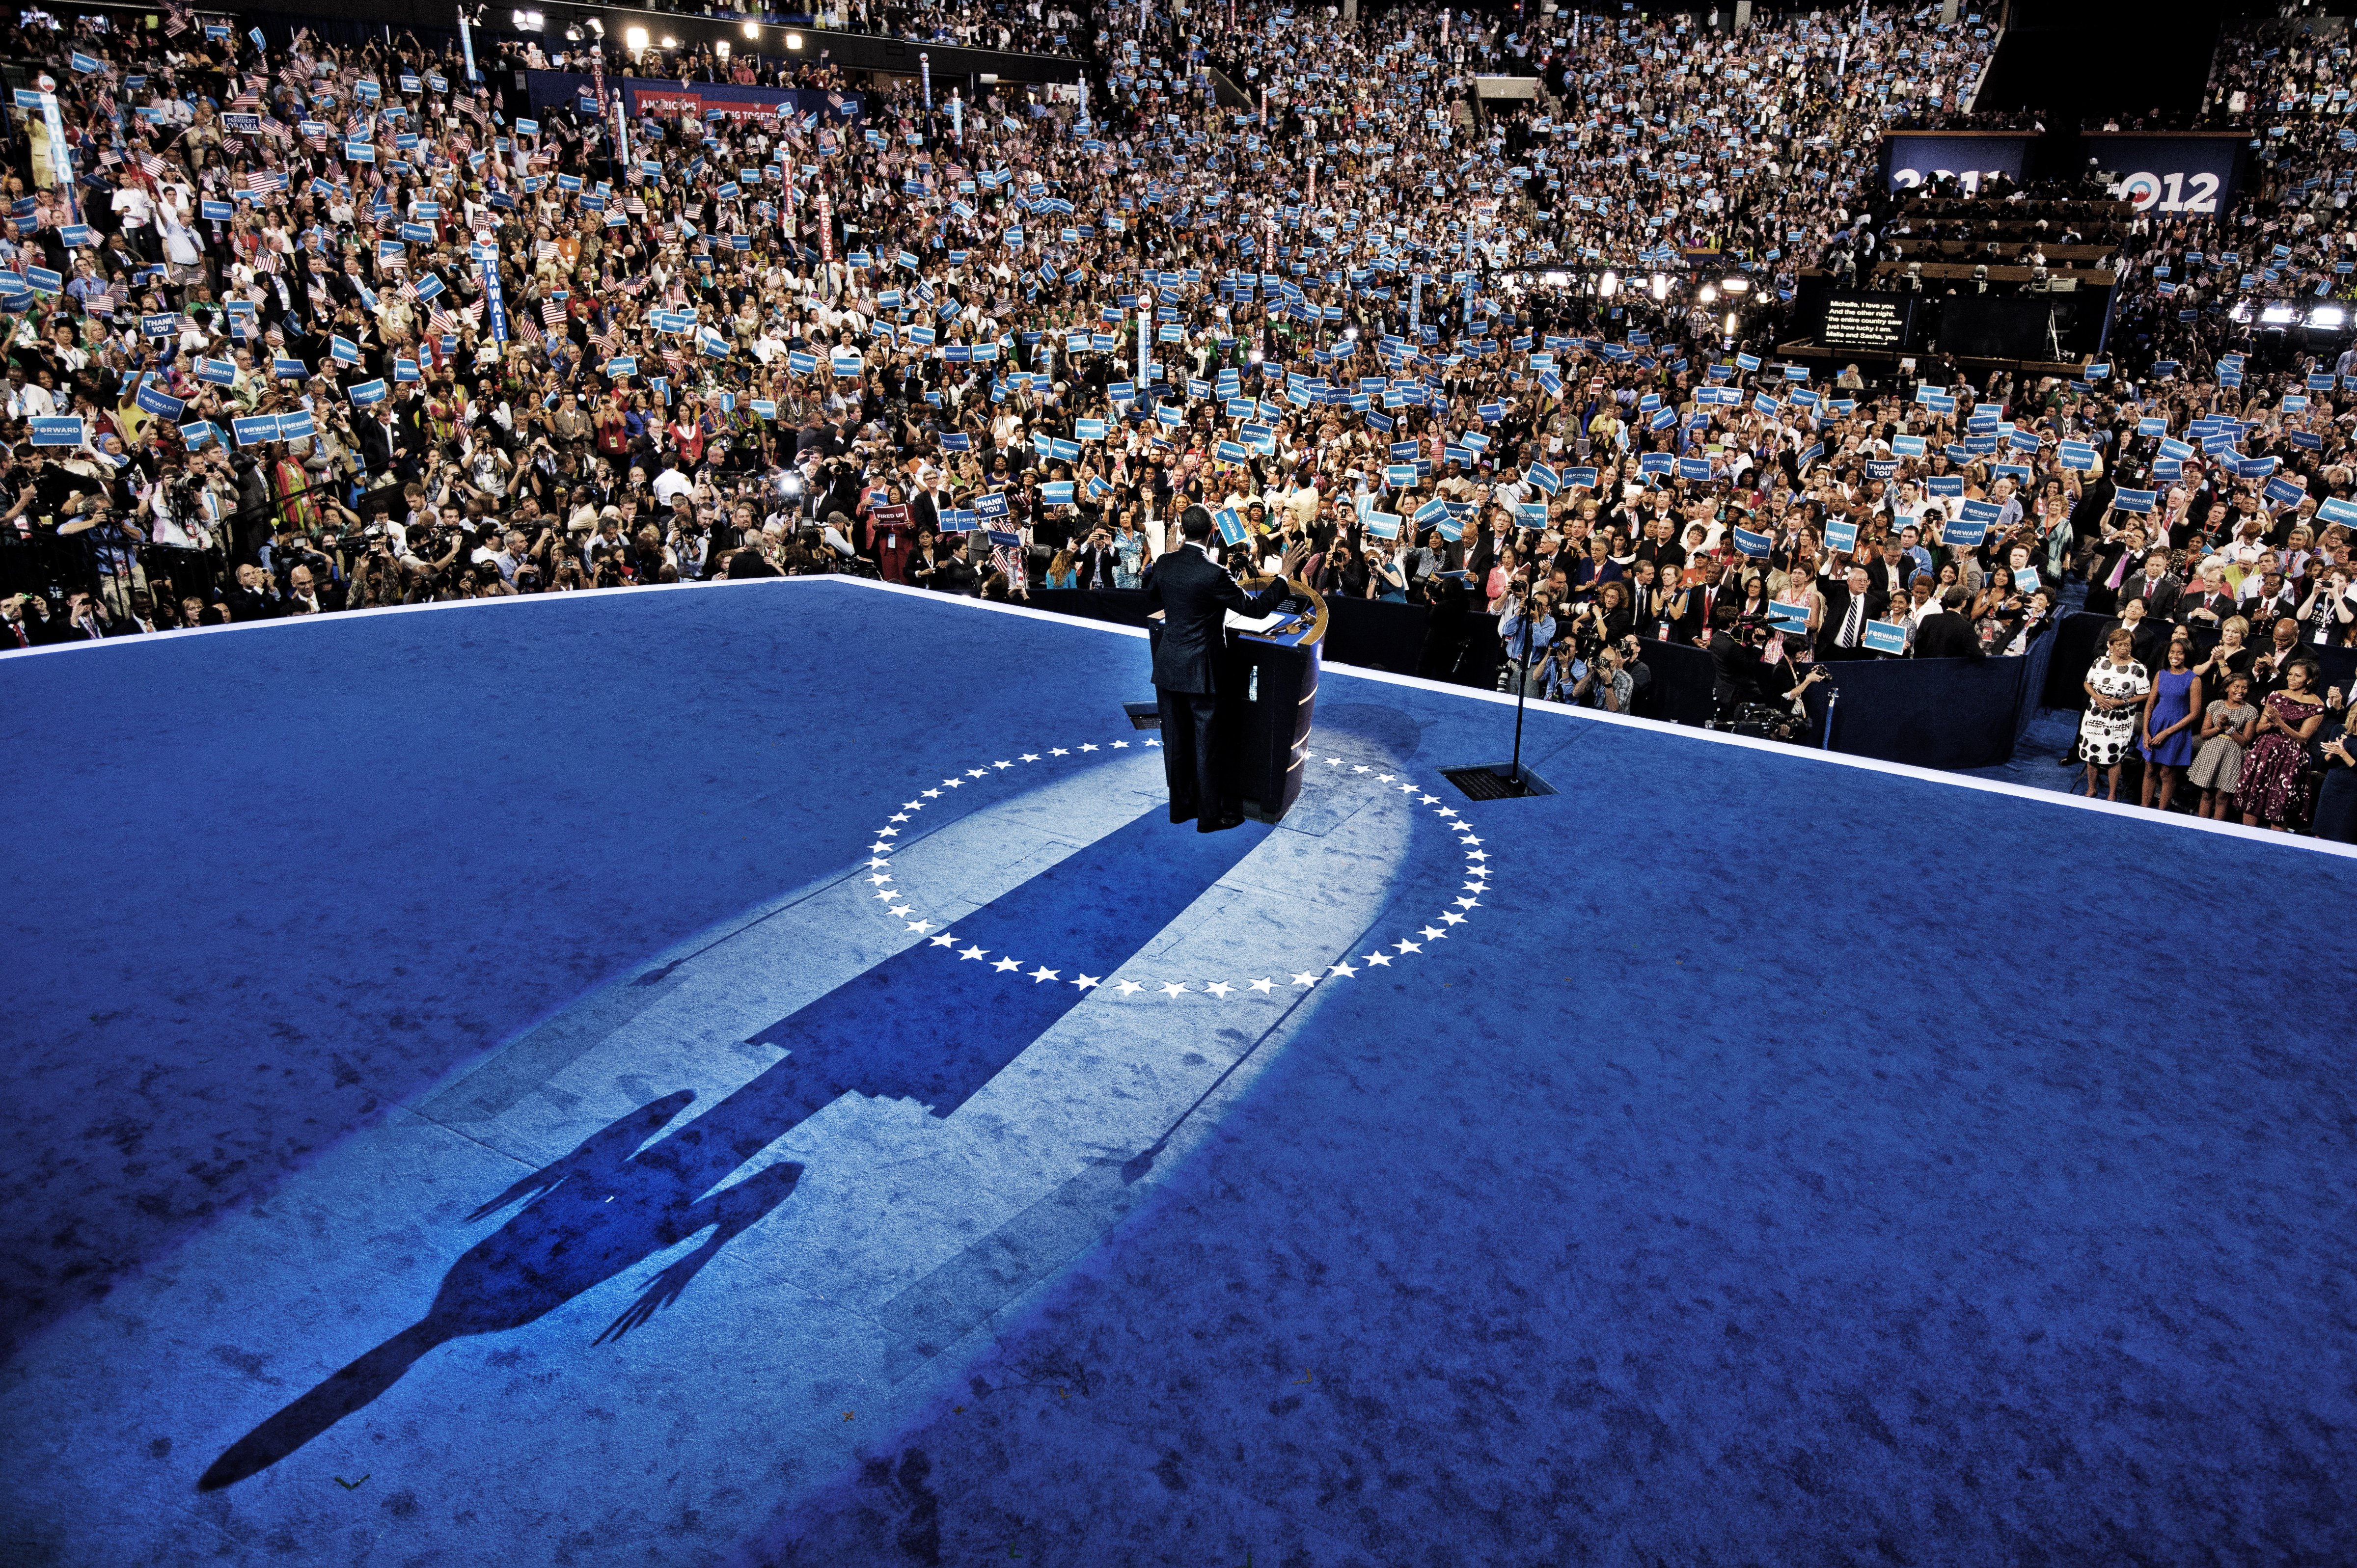 President Barack Obama onstage at the Democratic National Convention at Time Warner Cable Arena on September 6, 2012 in Charlotte, N.C. (Charles Ommanney—Getty Images)